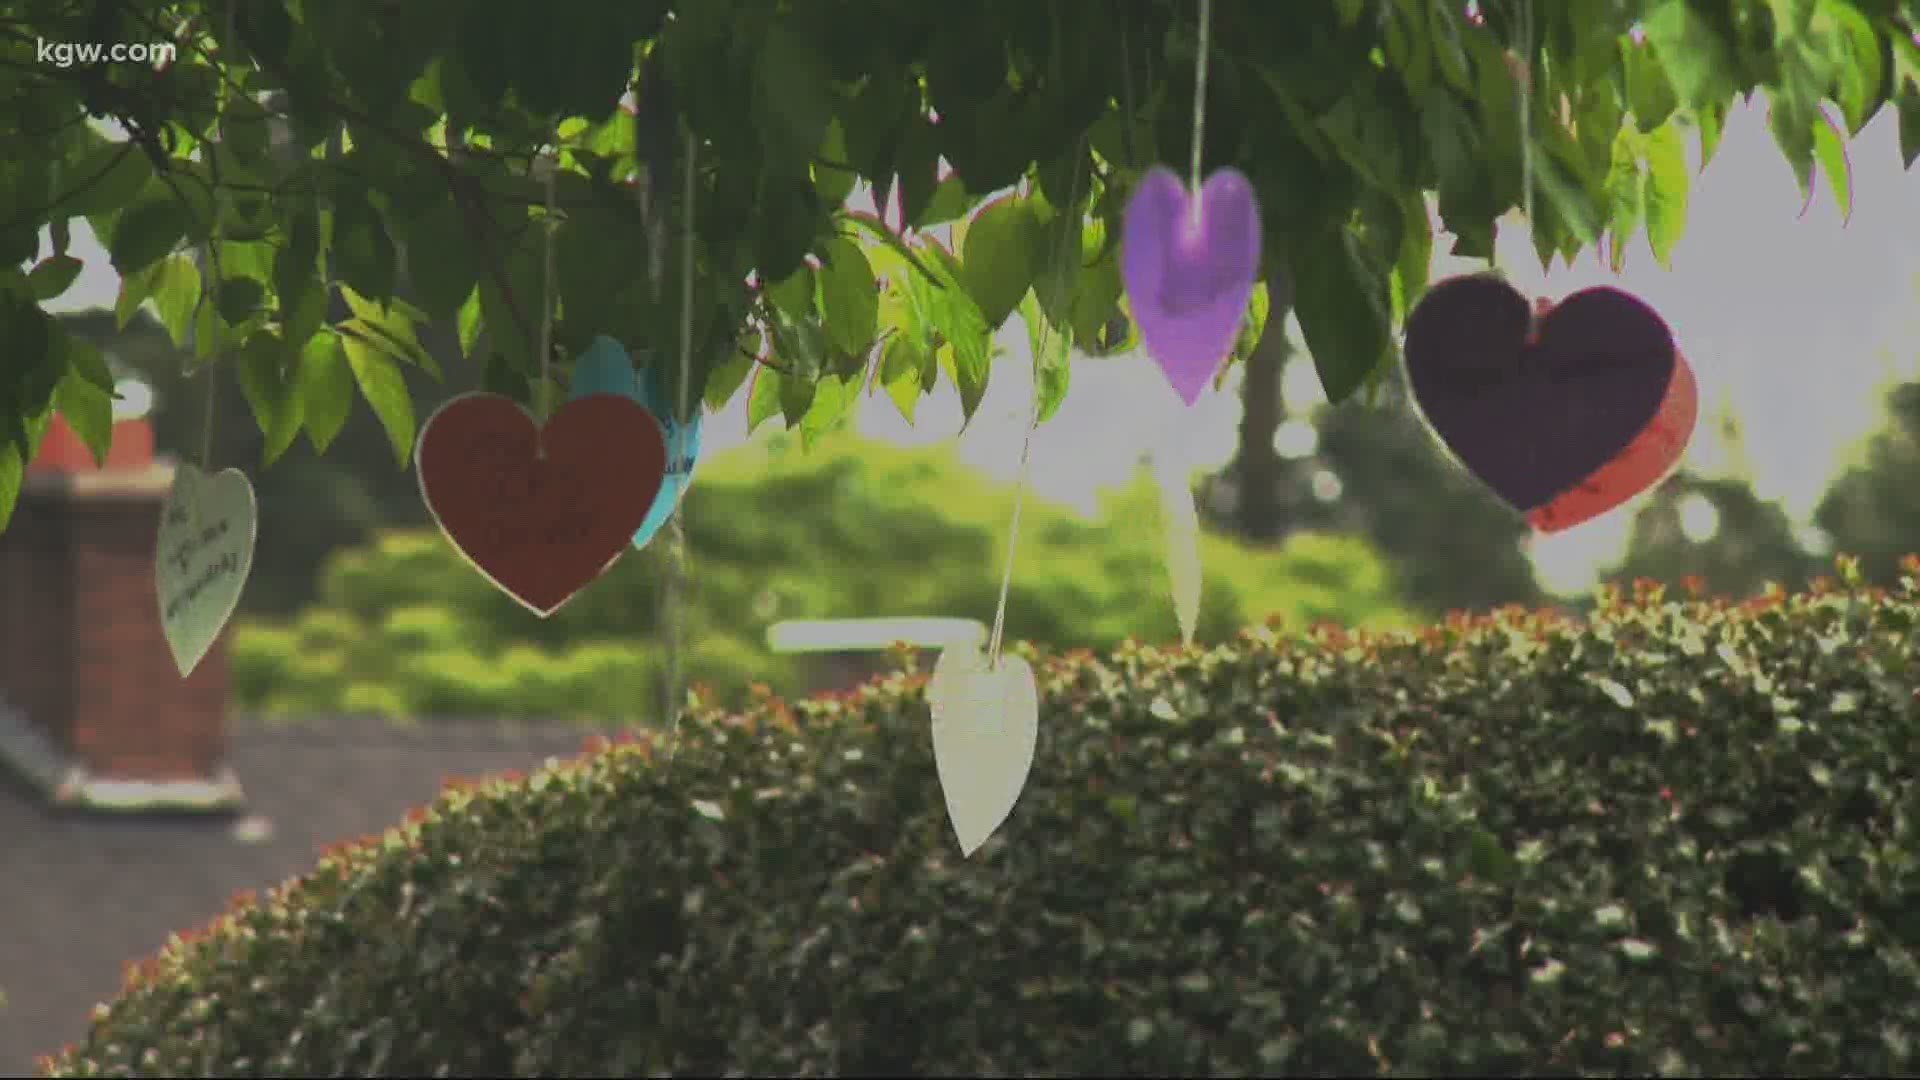 A “Gratitude Tree” in Southwest Portland is bringing people happiness.